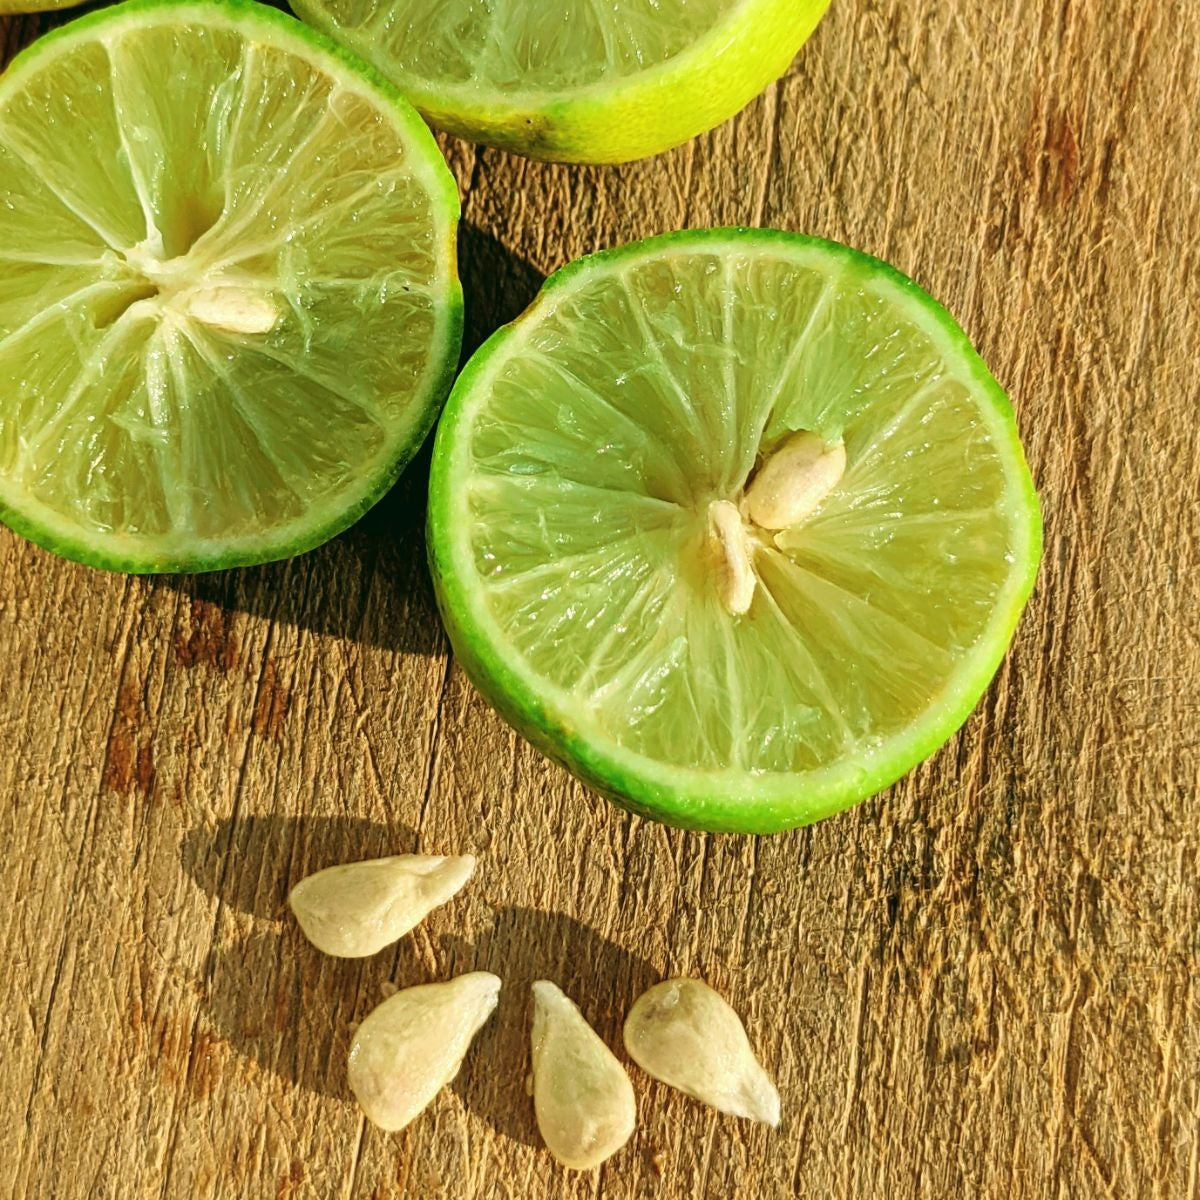 Natural, Non-GMO Produce, Heirloom Mexican Key Lime